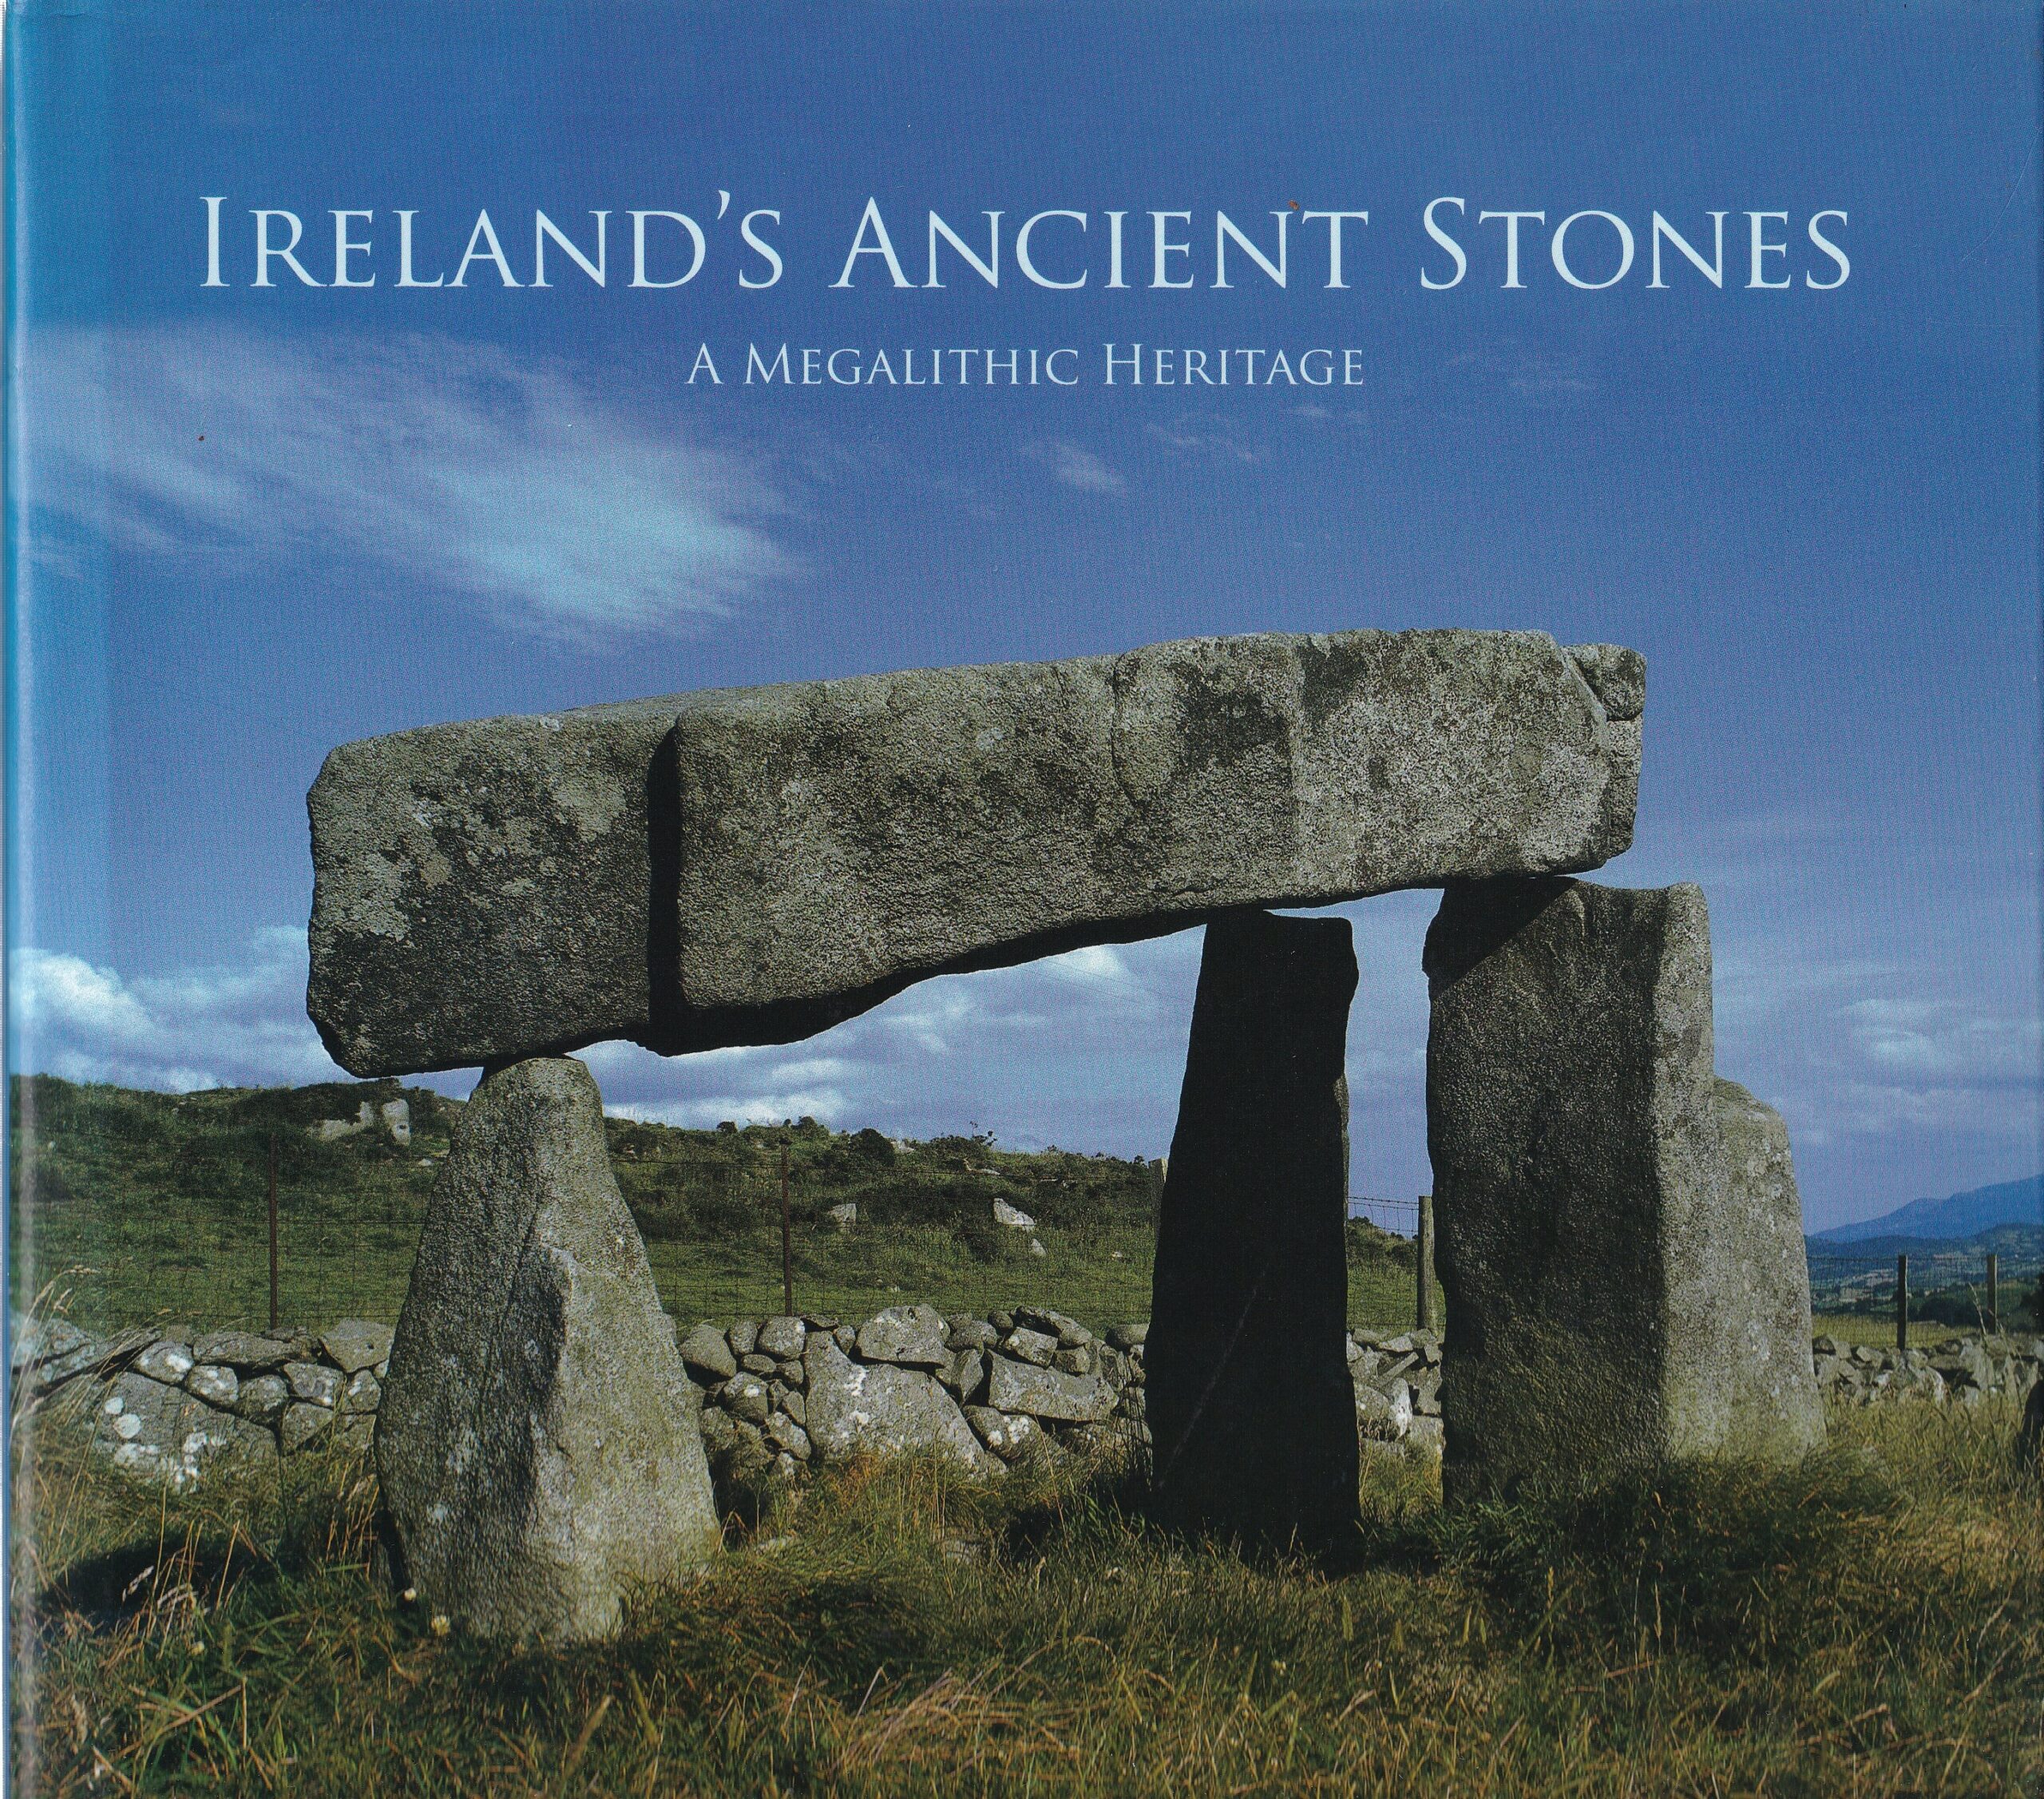 Ireland’s Ancient Stones: A Megalithic Heritage | Kenneth McNally | Charlie Byrne's